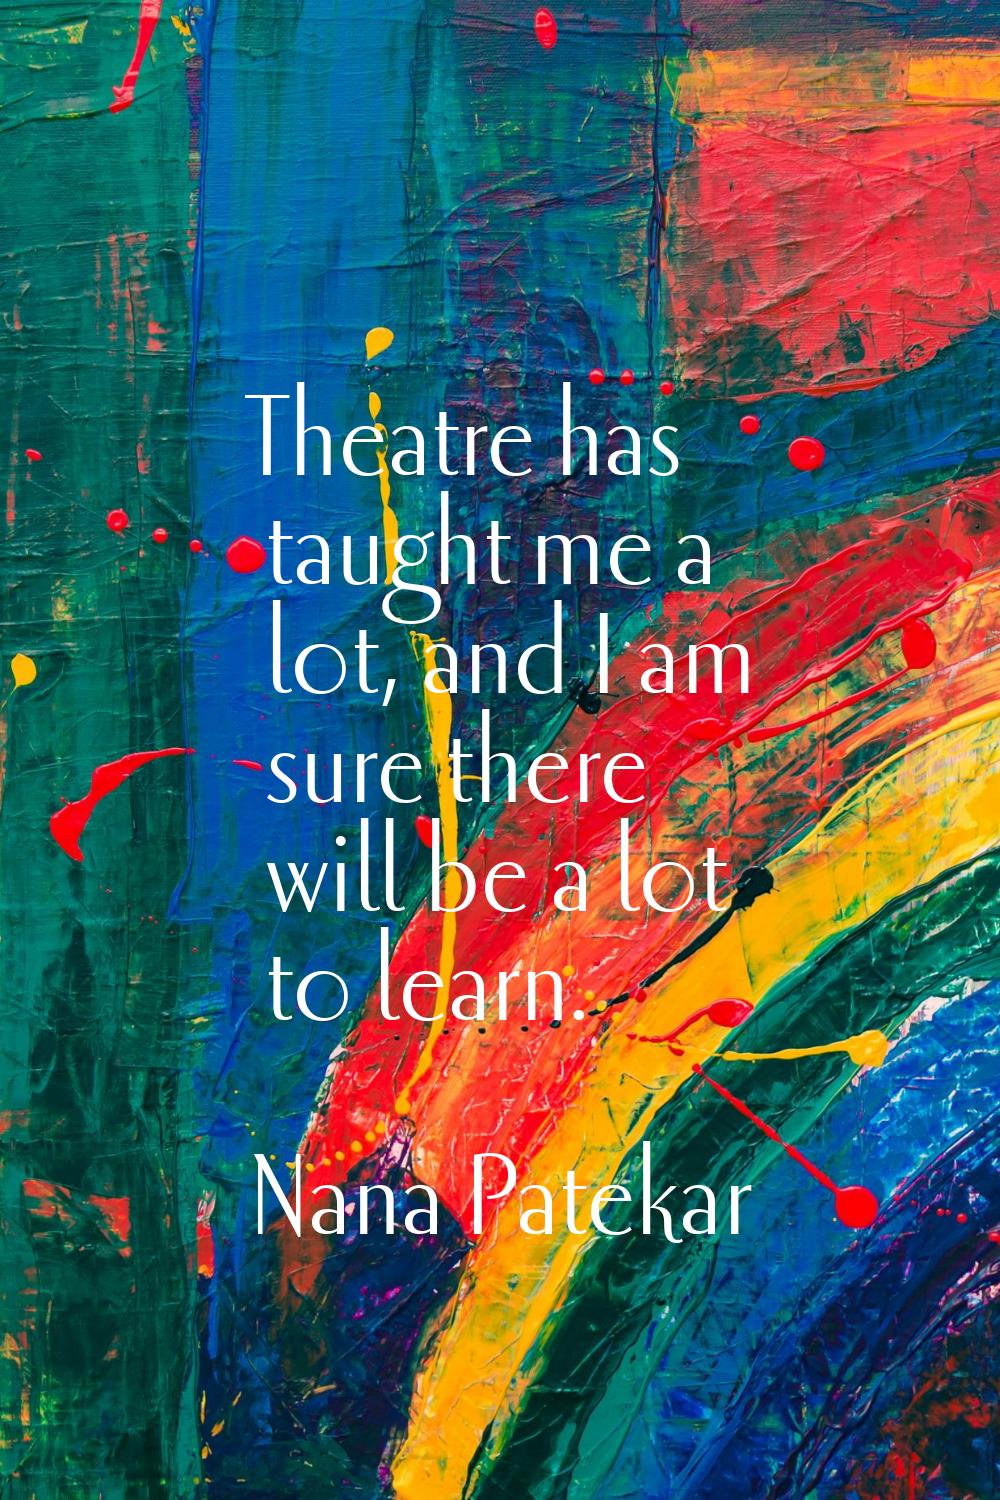 Theatre has taught me a lot, and I am sure there will be a lot to learn.